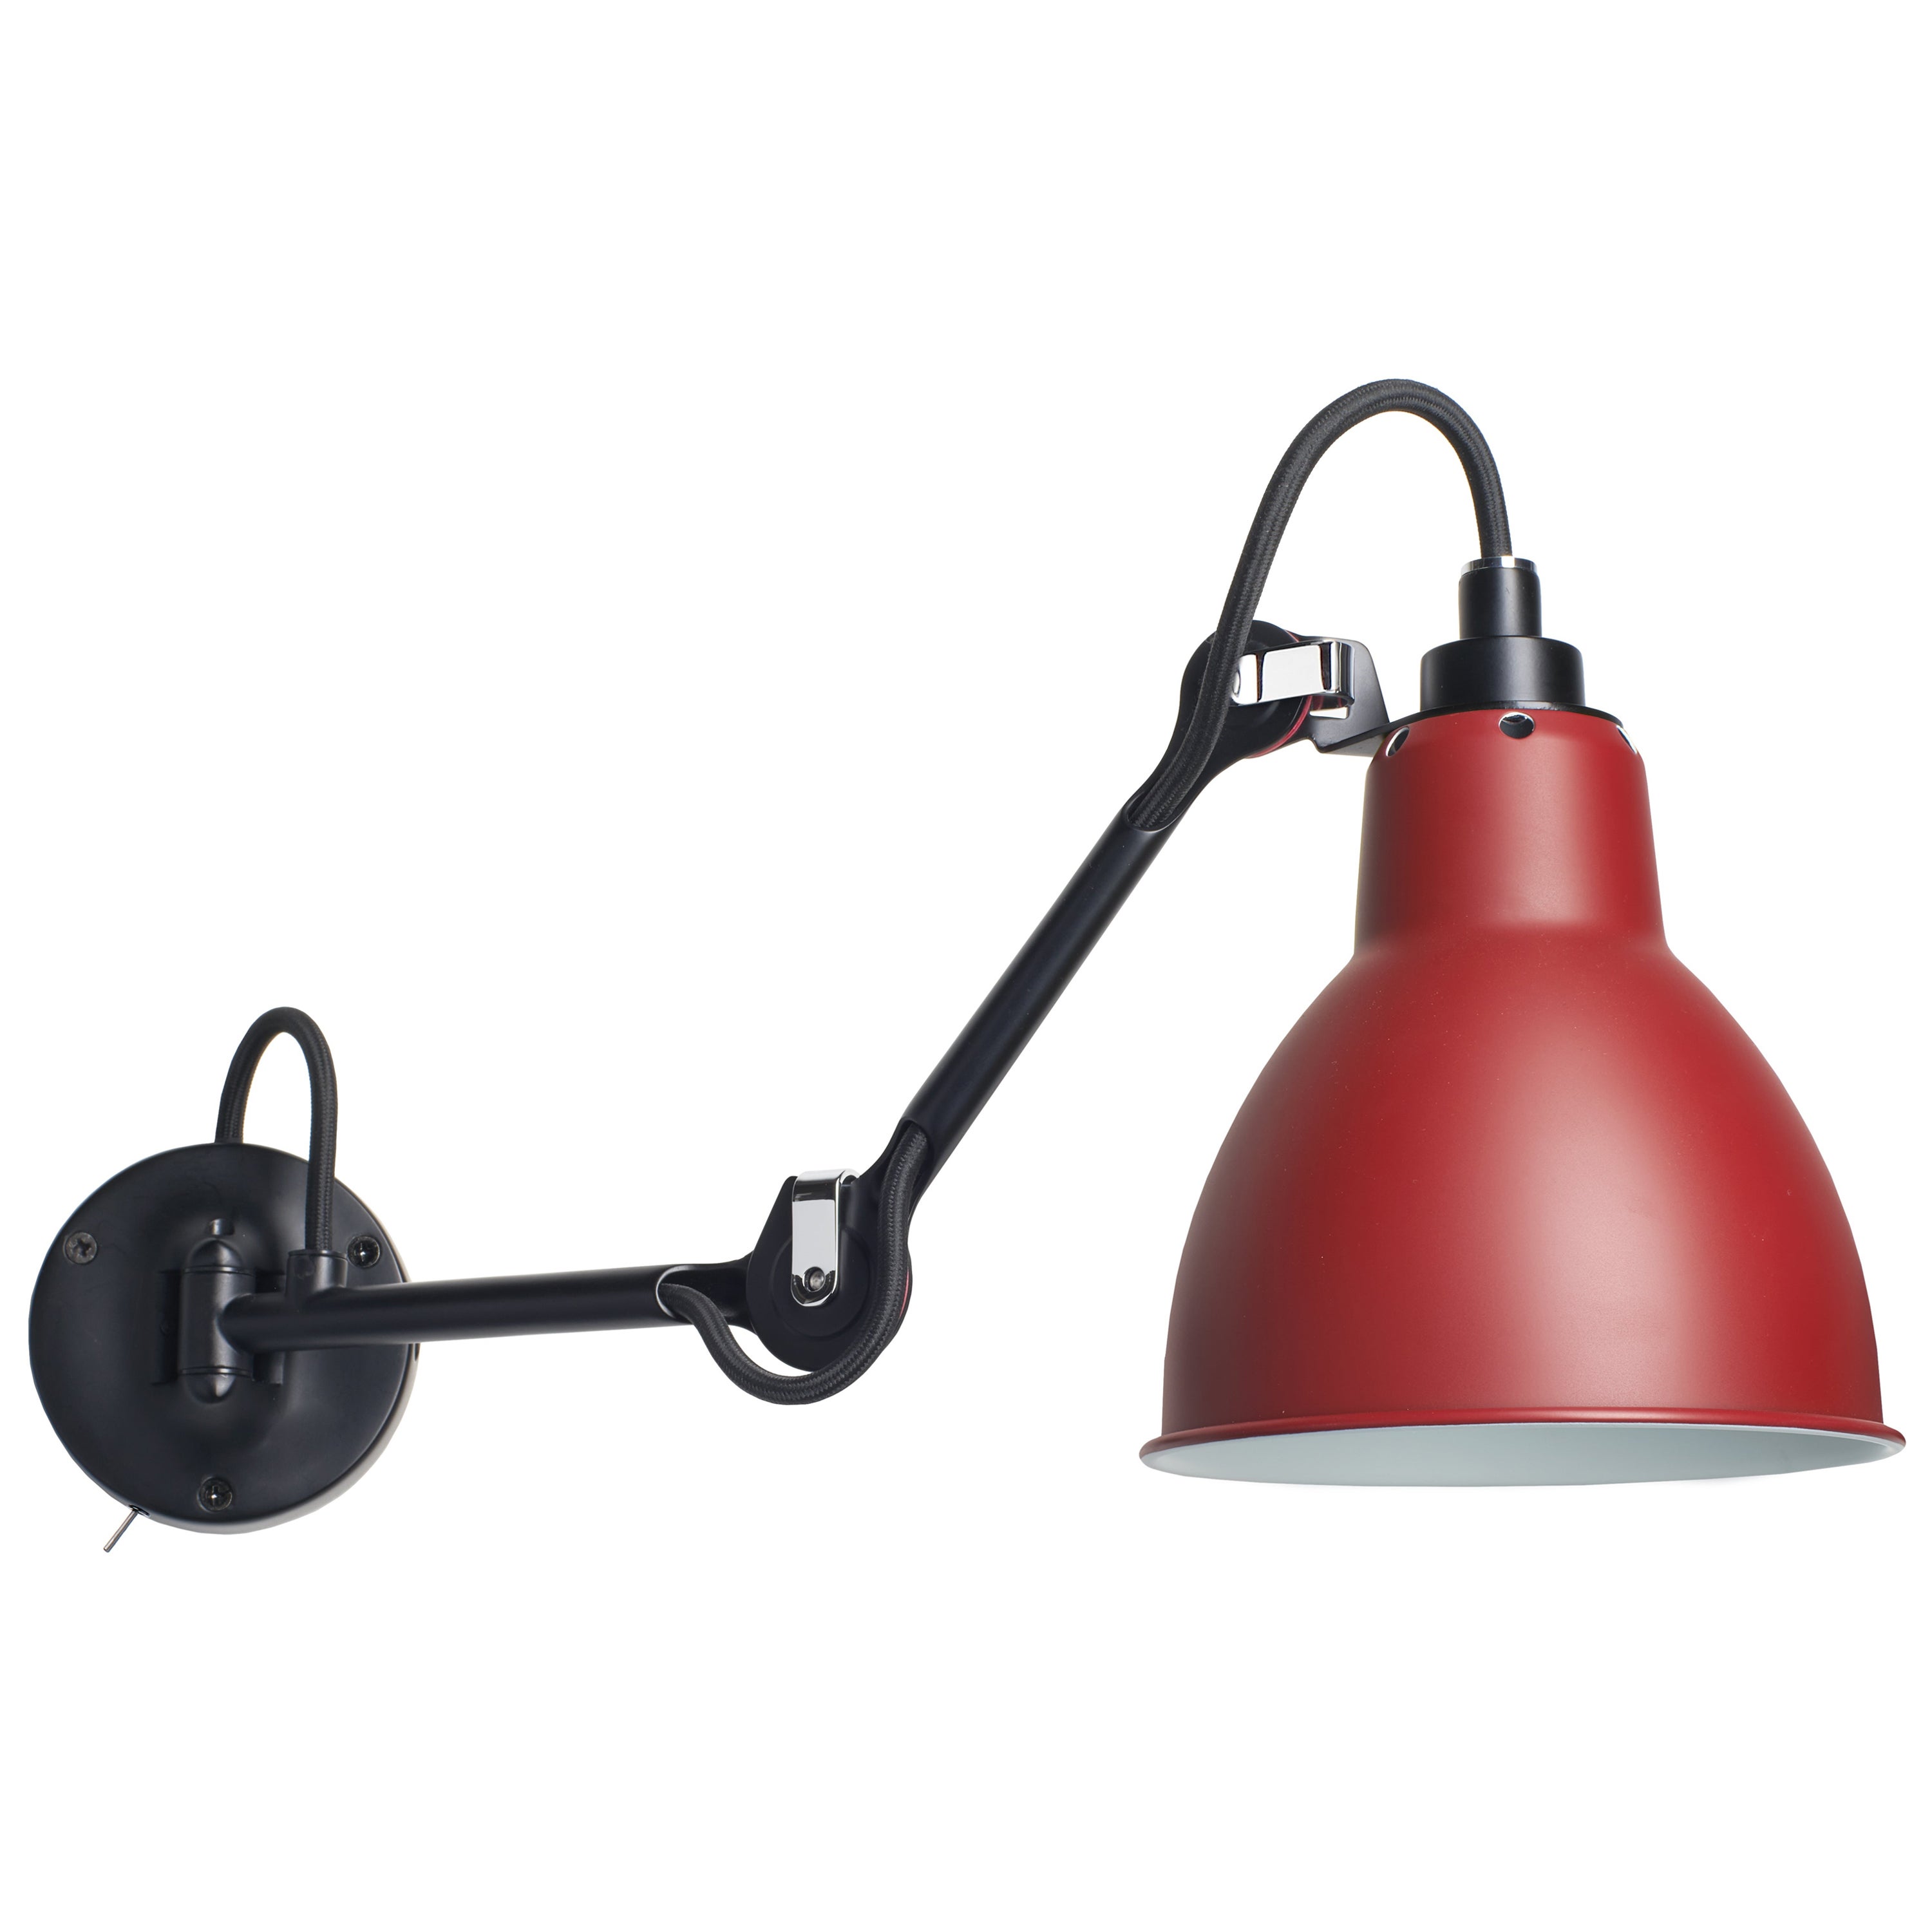 DCW Editions La Lampe Gras N°204 SW Wall Lamp in Black Steel Arm and Red Shade For Sale